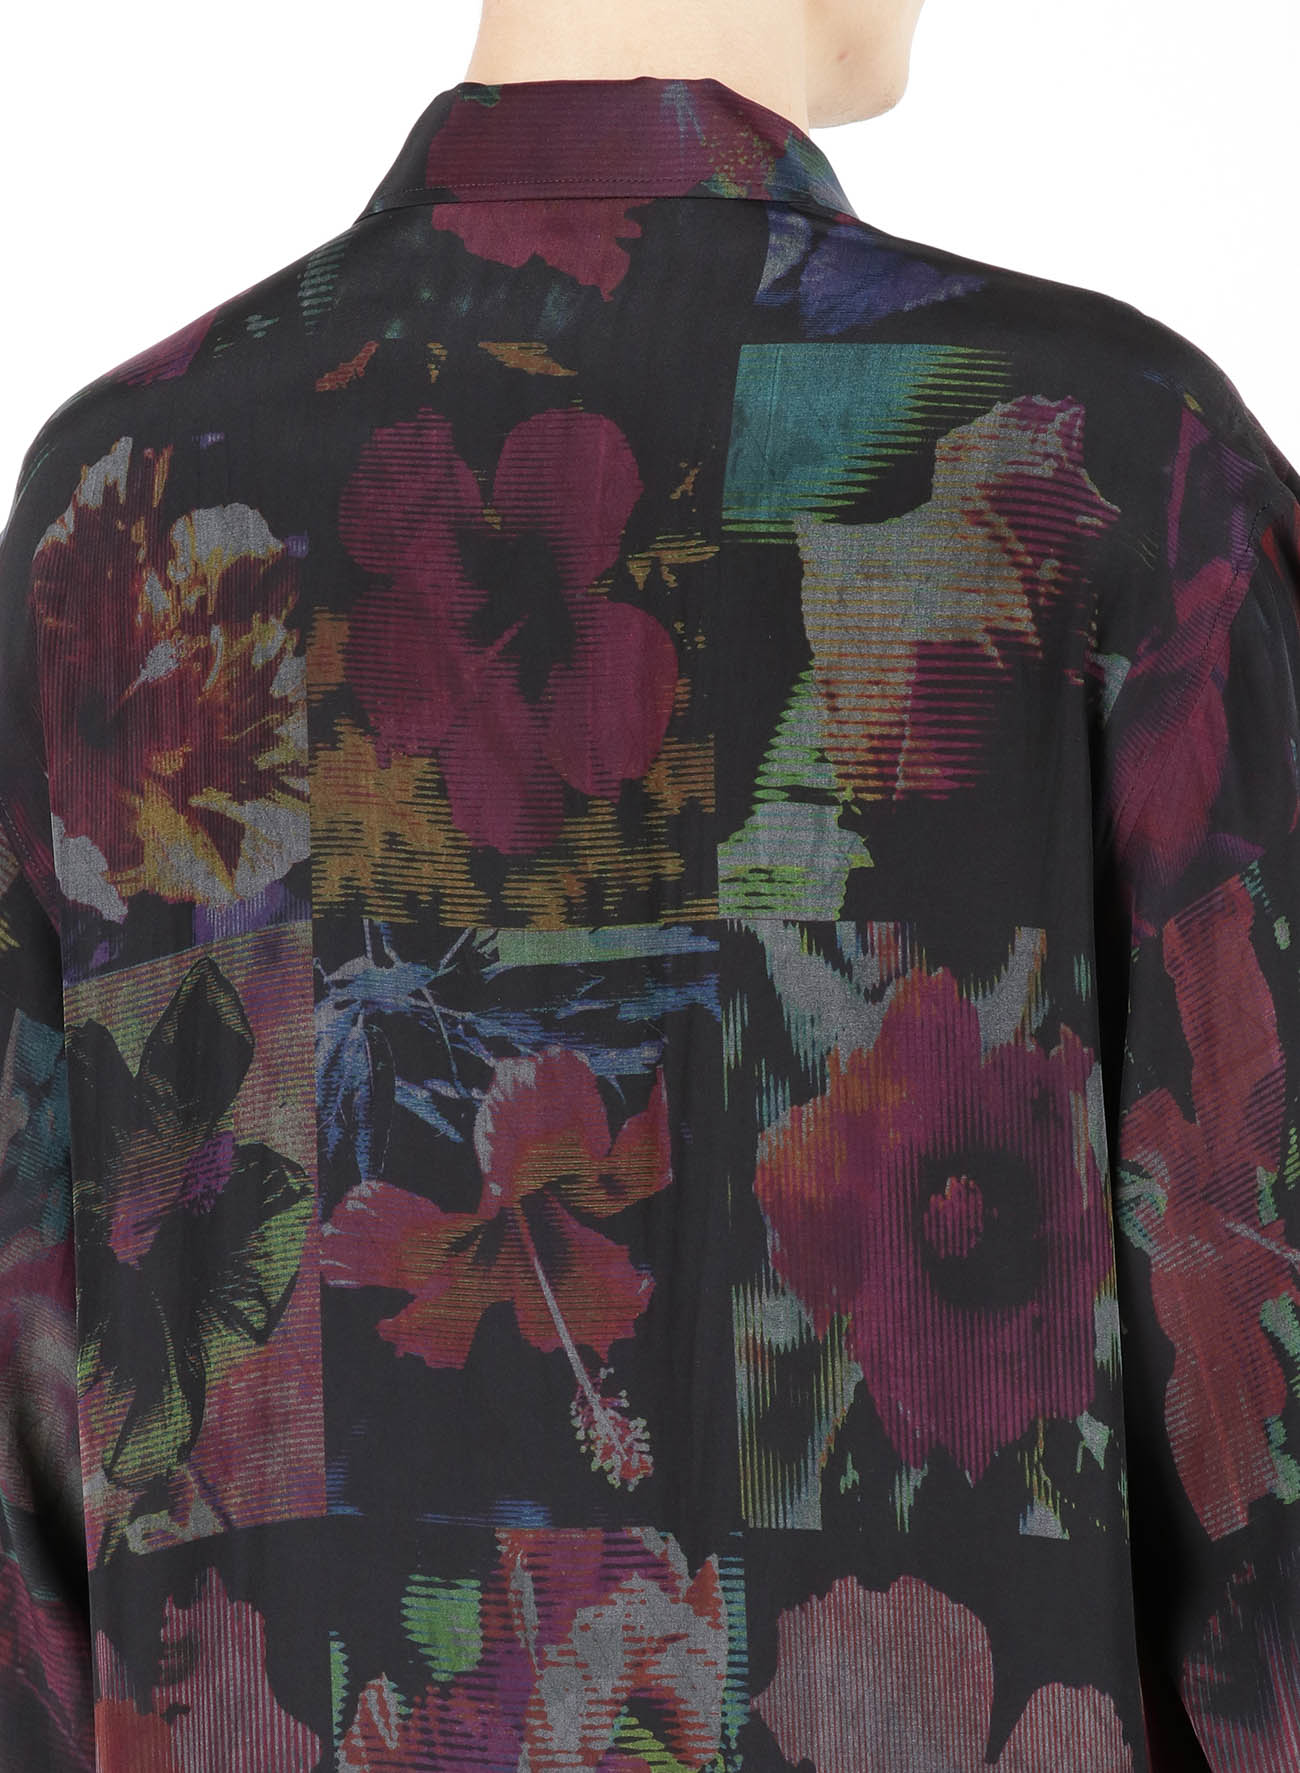 SILK SATIN DICTIONARY OF FLOWERS BUDDHA BUTTON BLOUSE